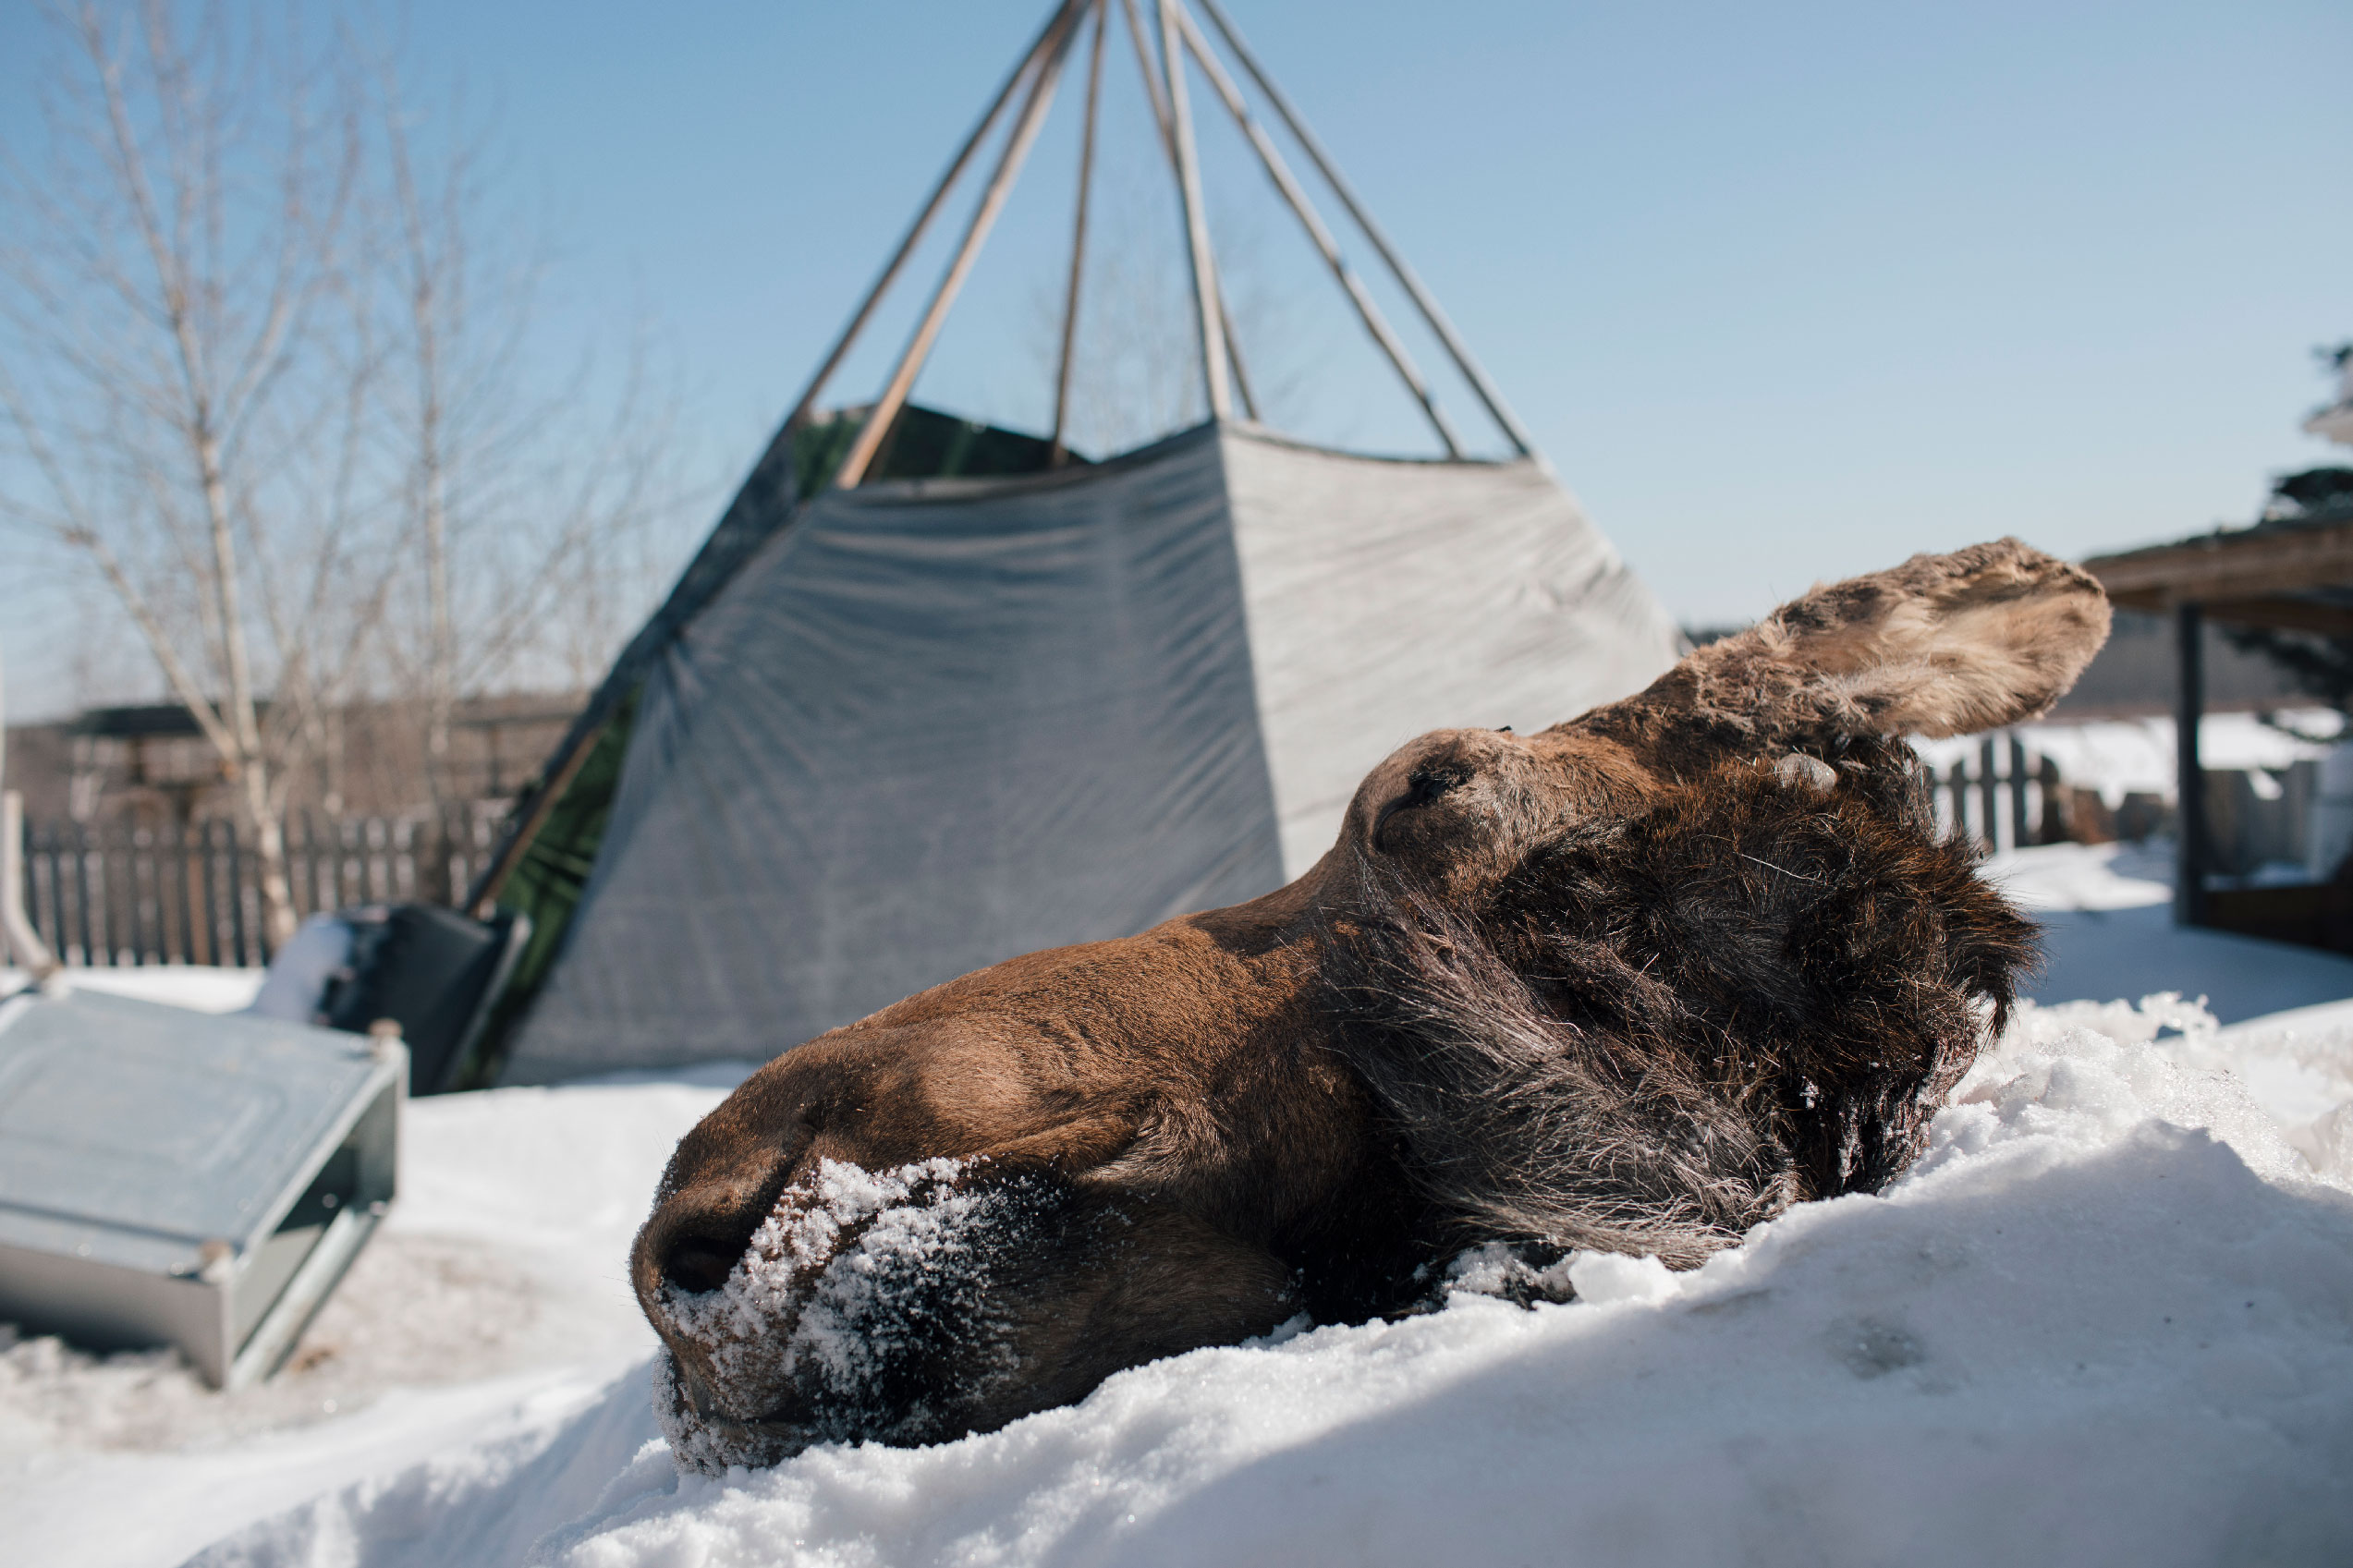 A moose harvested by L'Hommecourt, seen on snowy ground.